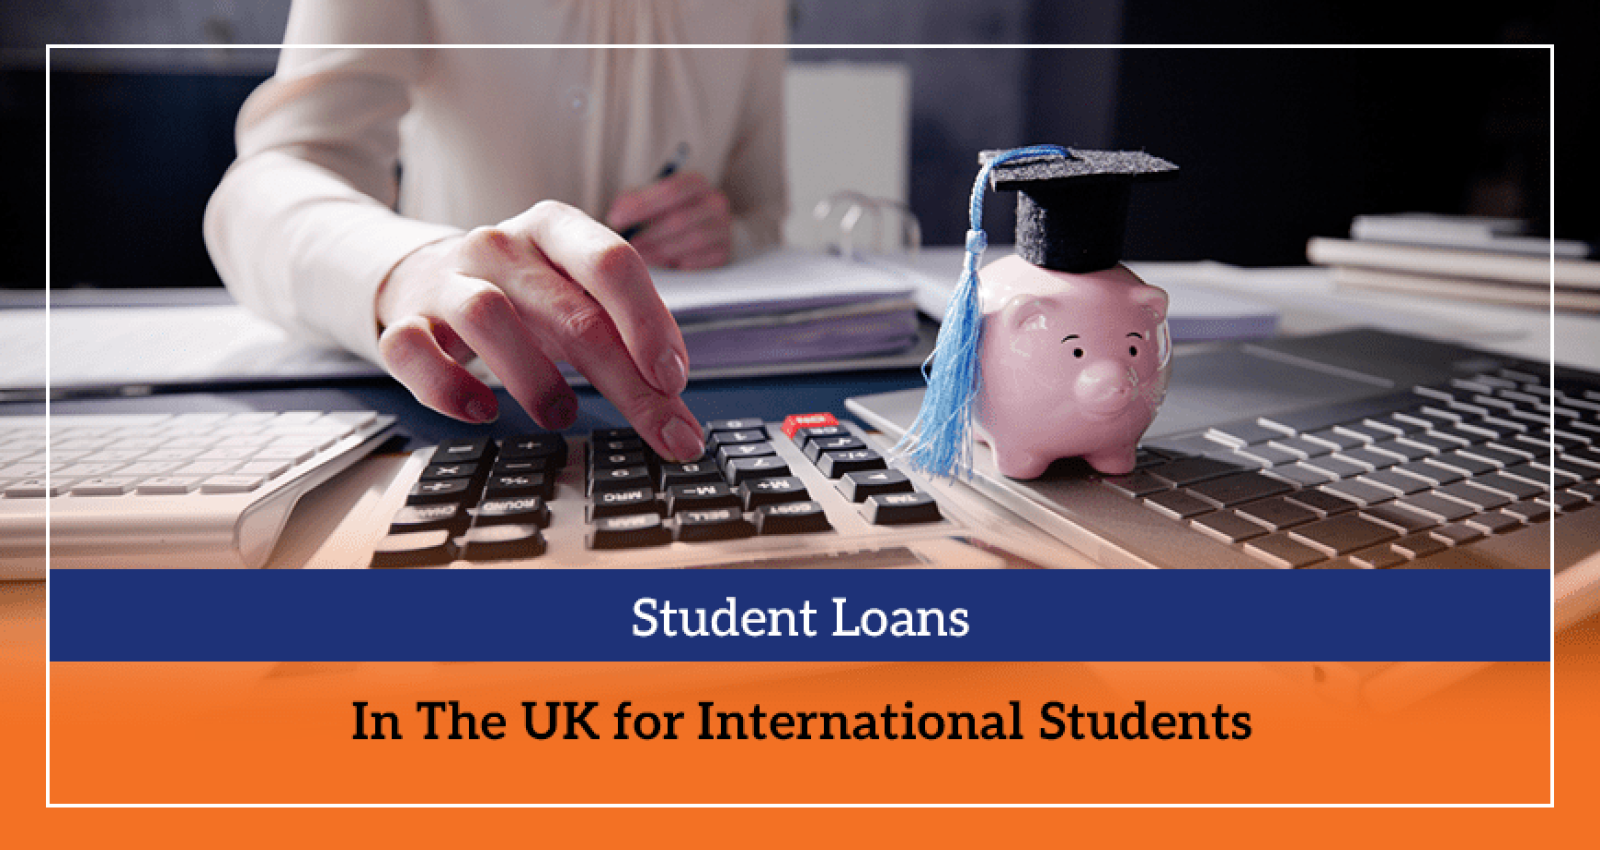 Student Loans In The UK for International Students